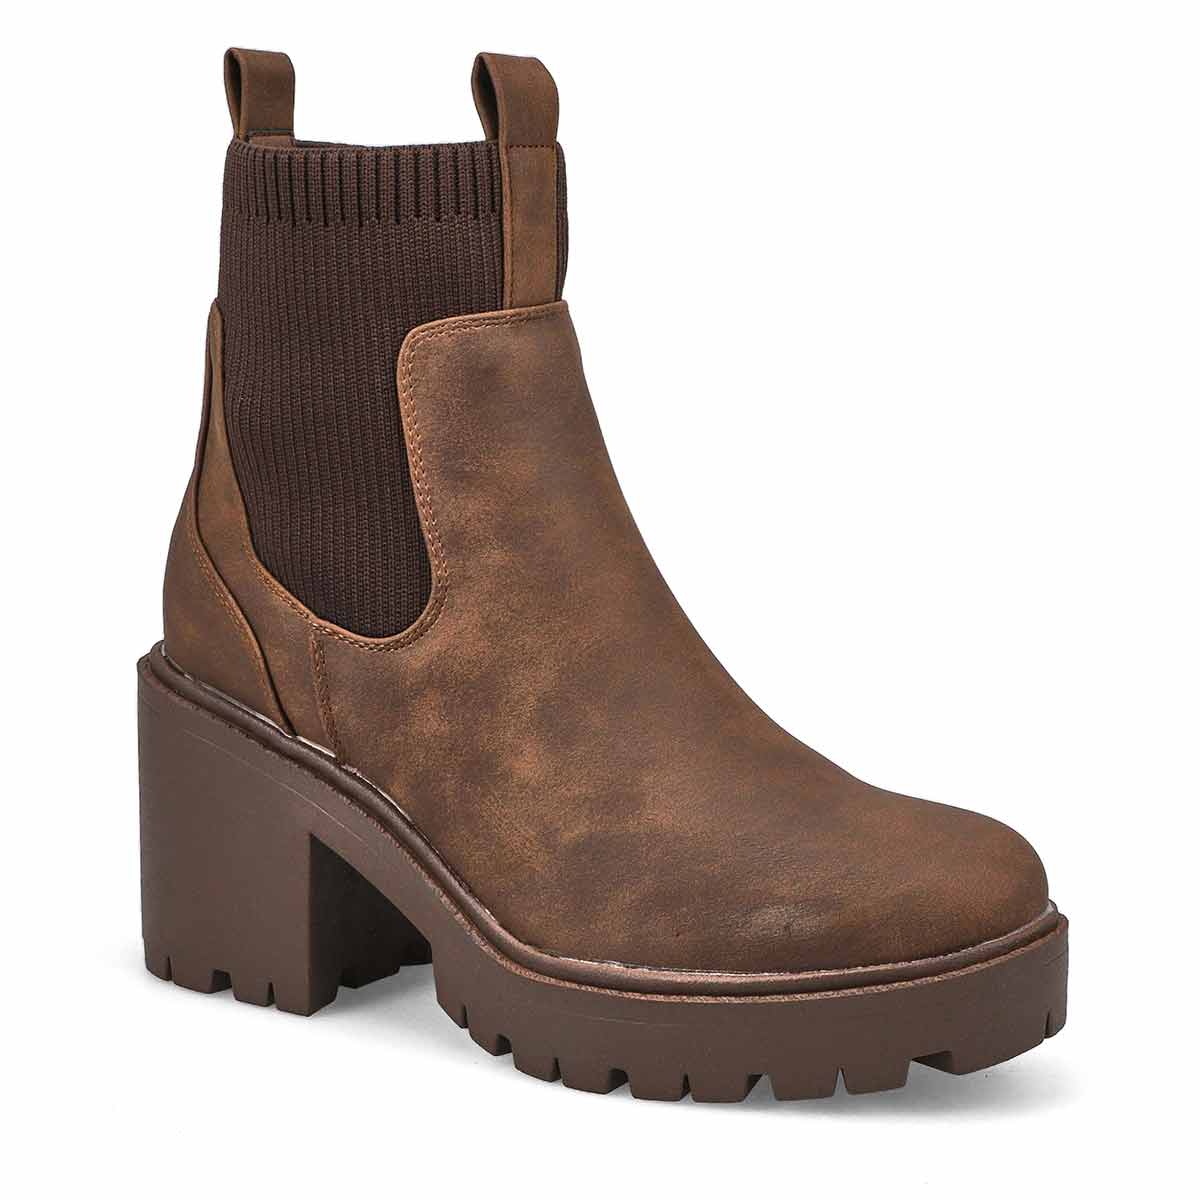 Brown ankle boots